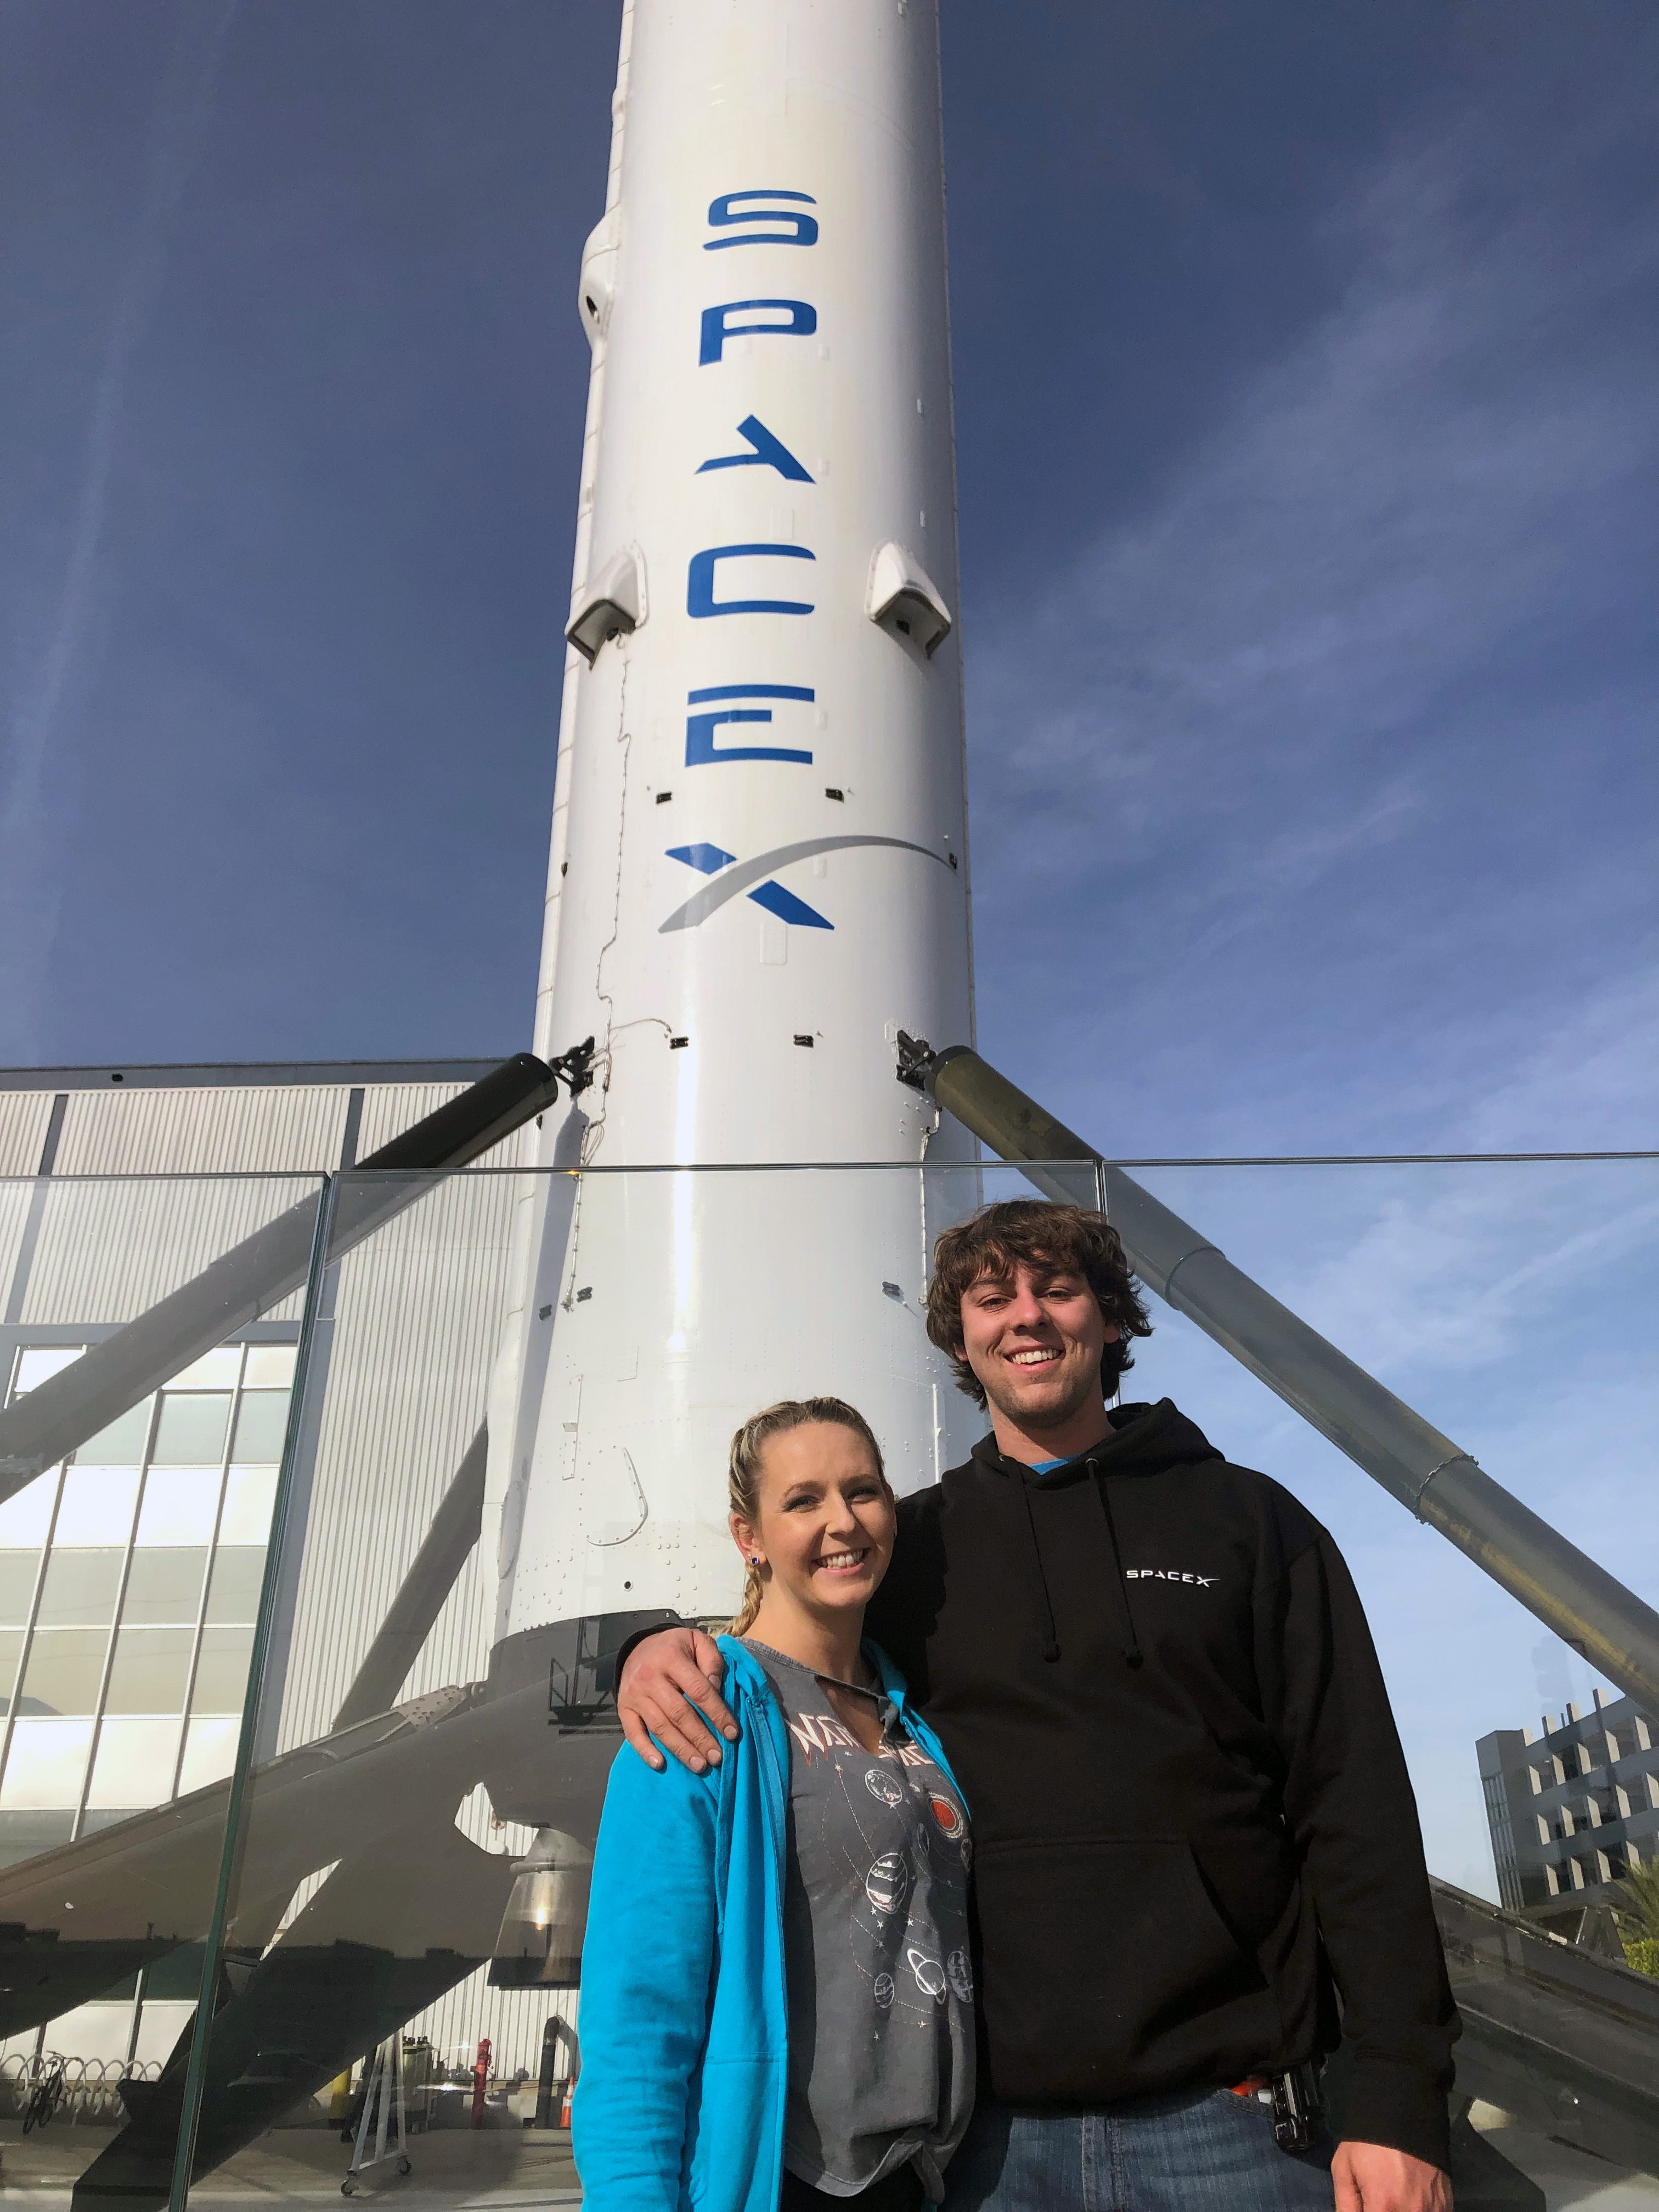 GNTC alumnus Dusty Powell (right) stands with his girlfriend D’ana Gay in front of the SpaceX headquarters in Hawthorne, California where he works as a maintenance technician.